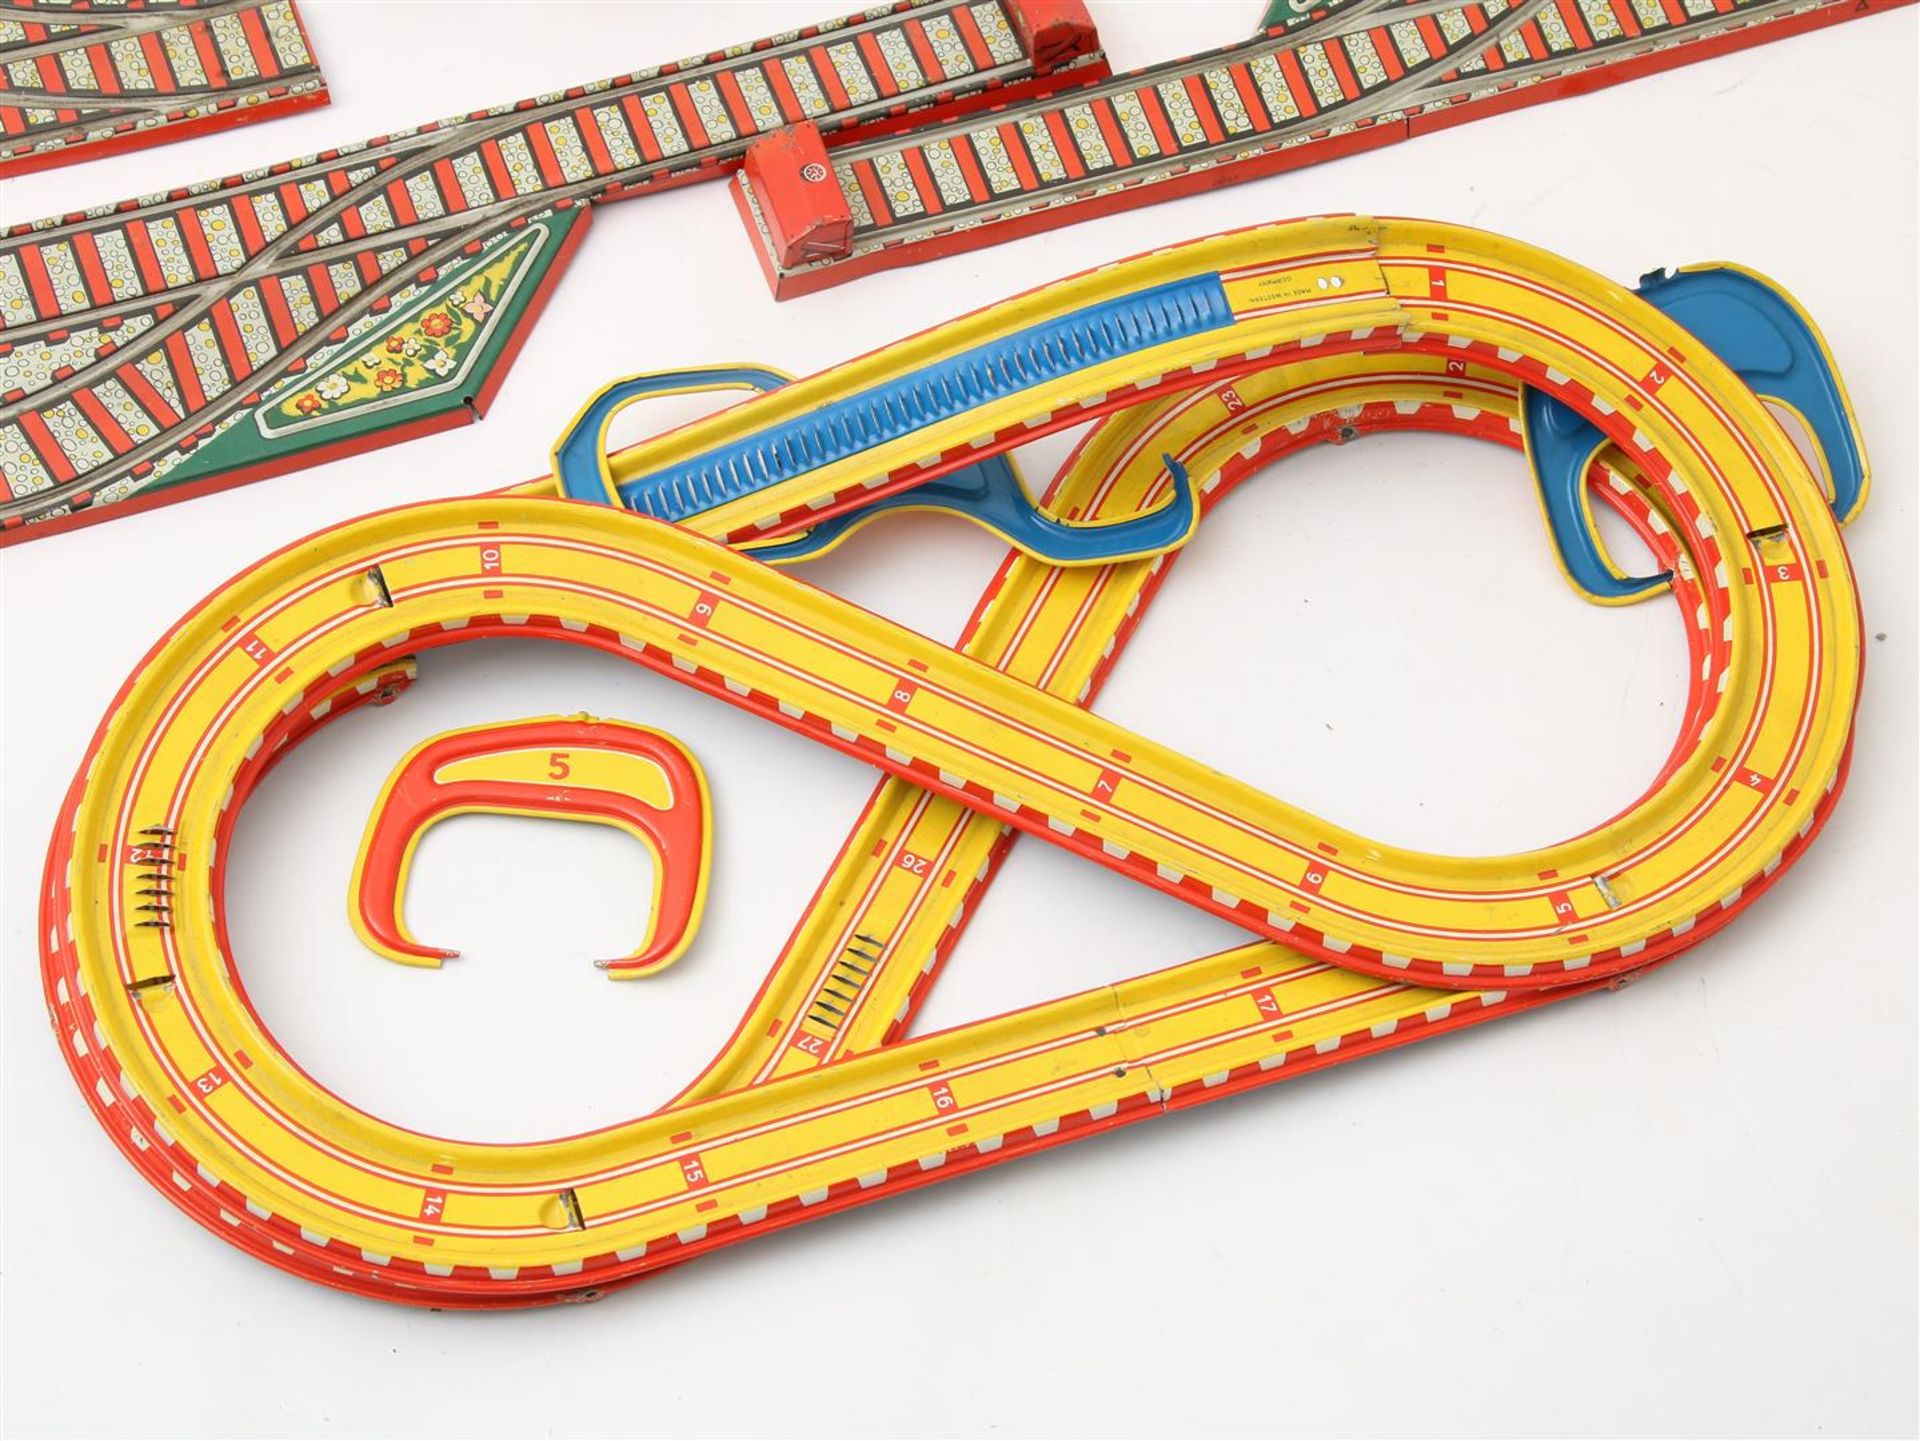 Lot of a tin Toboggan roller-coaster with 3 wagons, marked Technofix, Germany 1960-1969, a tin train - Image 2 of 3